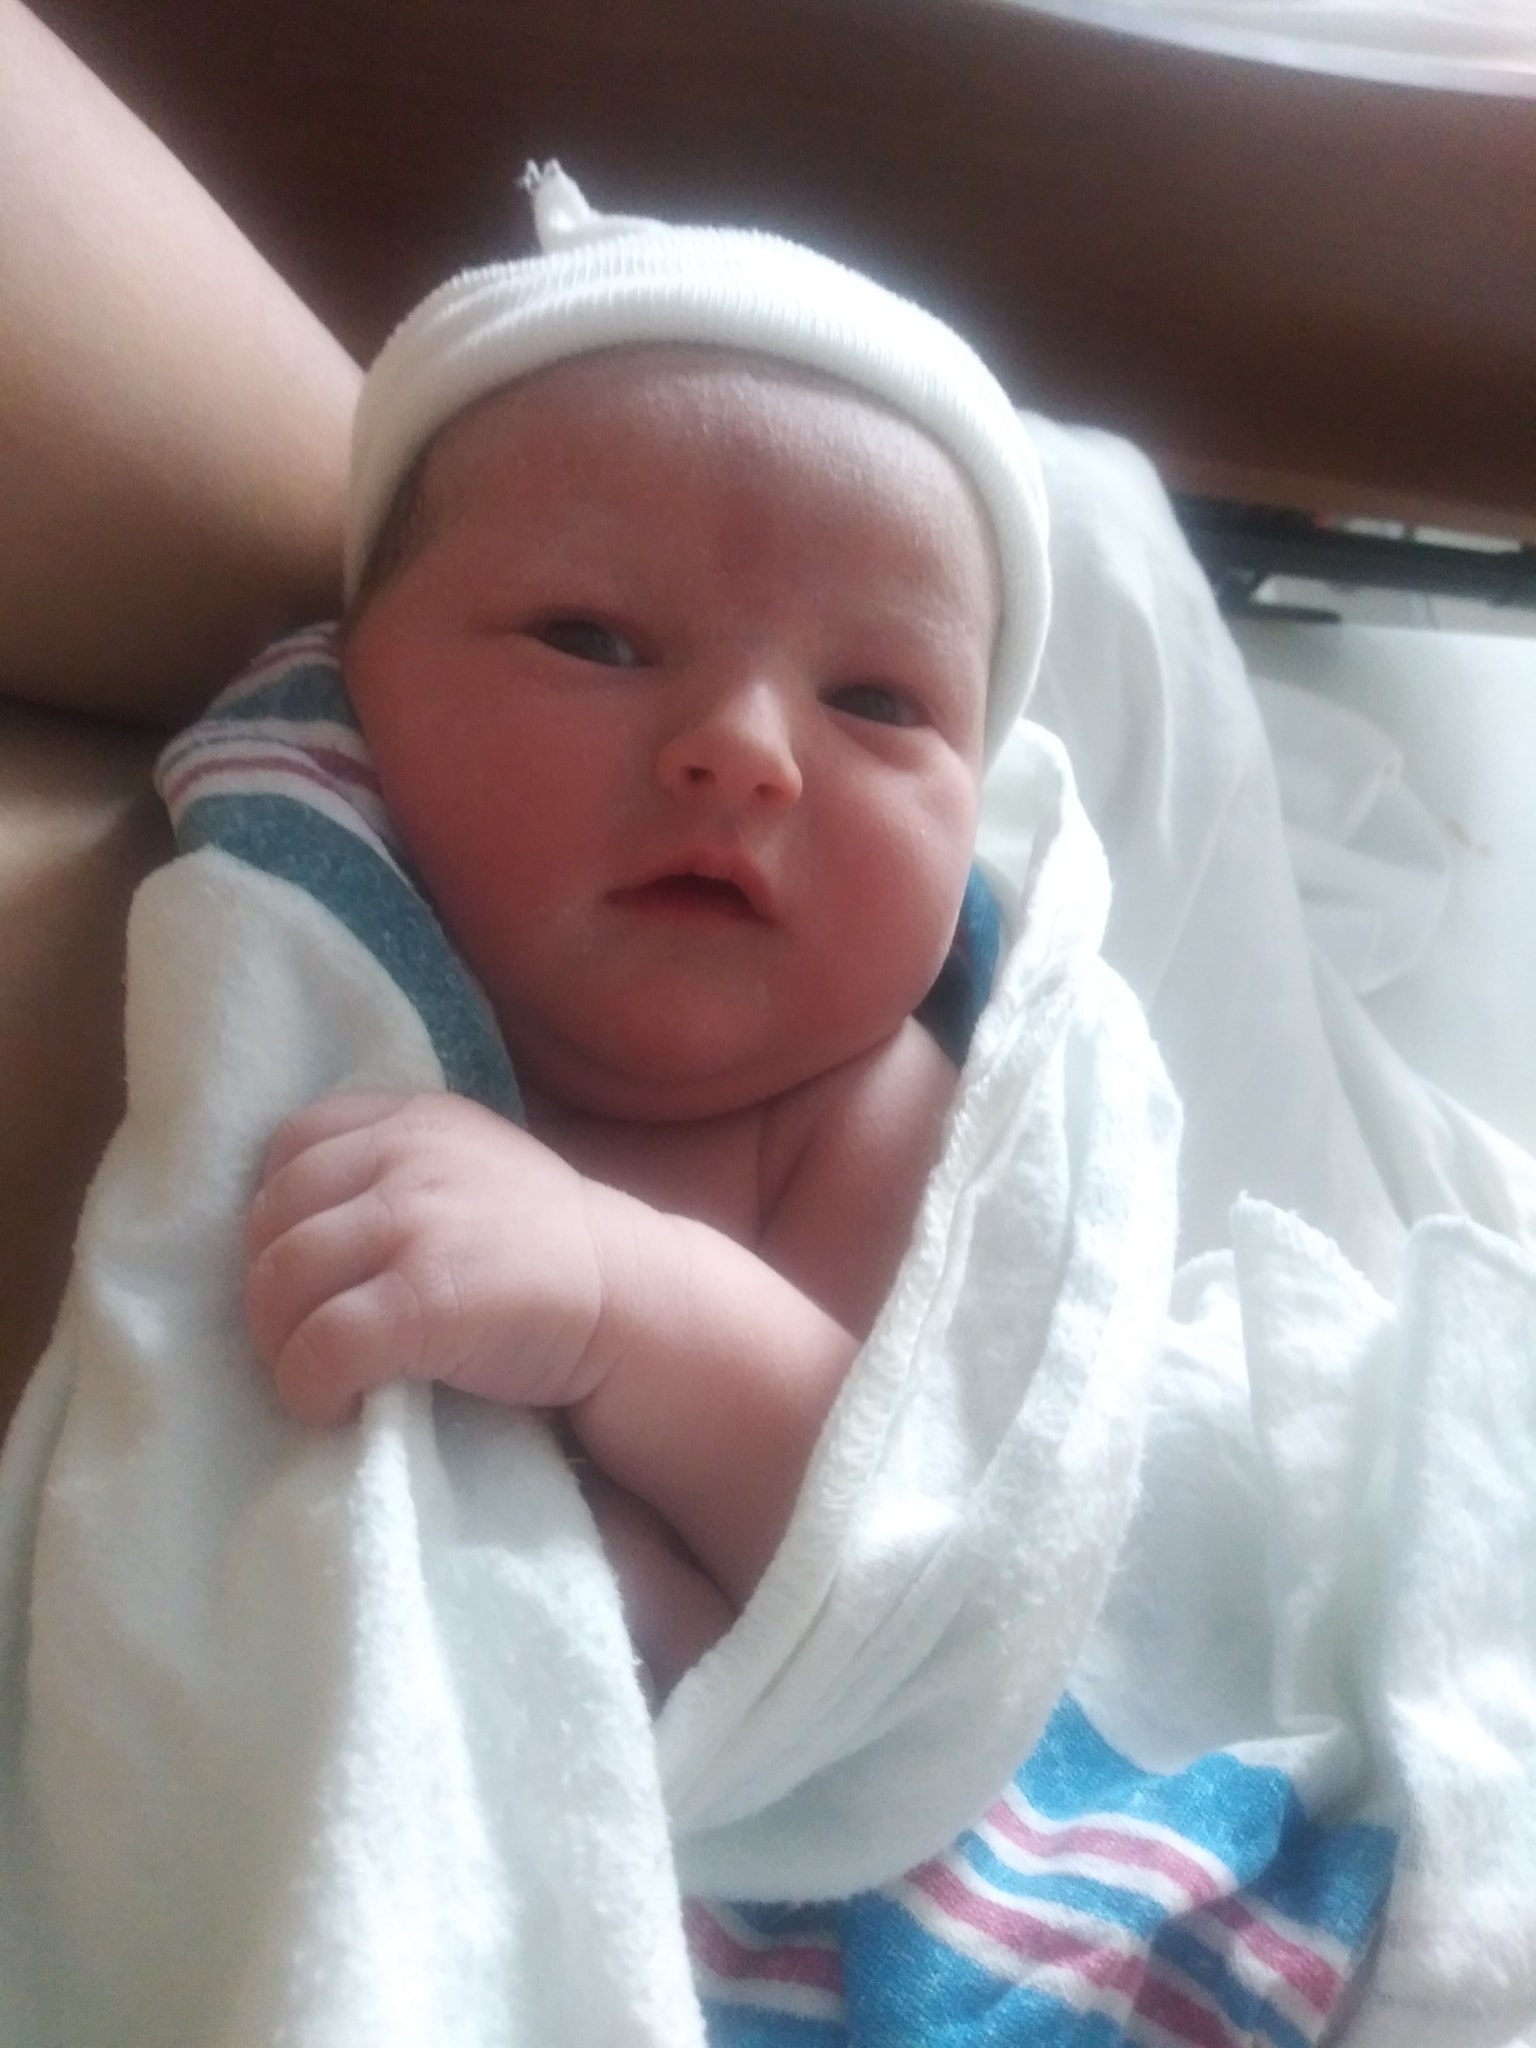 Simply Grazin' Ny Office Manager, Nichole Cortes gave birth to her beautiful daughter, Cyrus Rayne Loveland on May 17